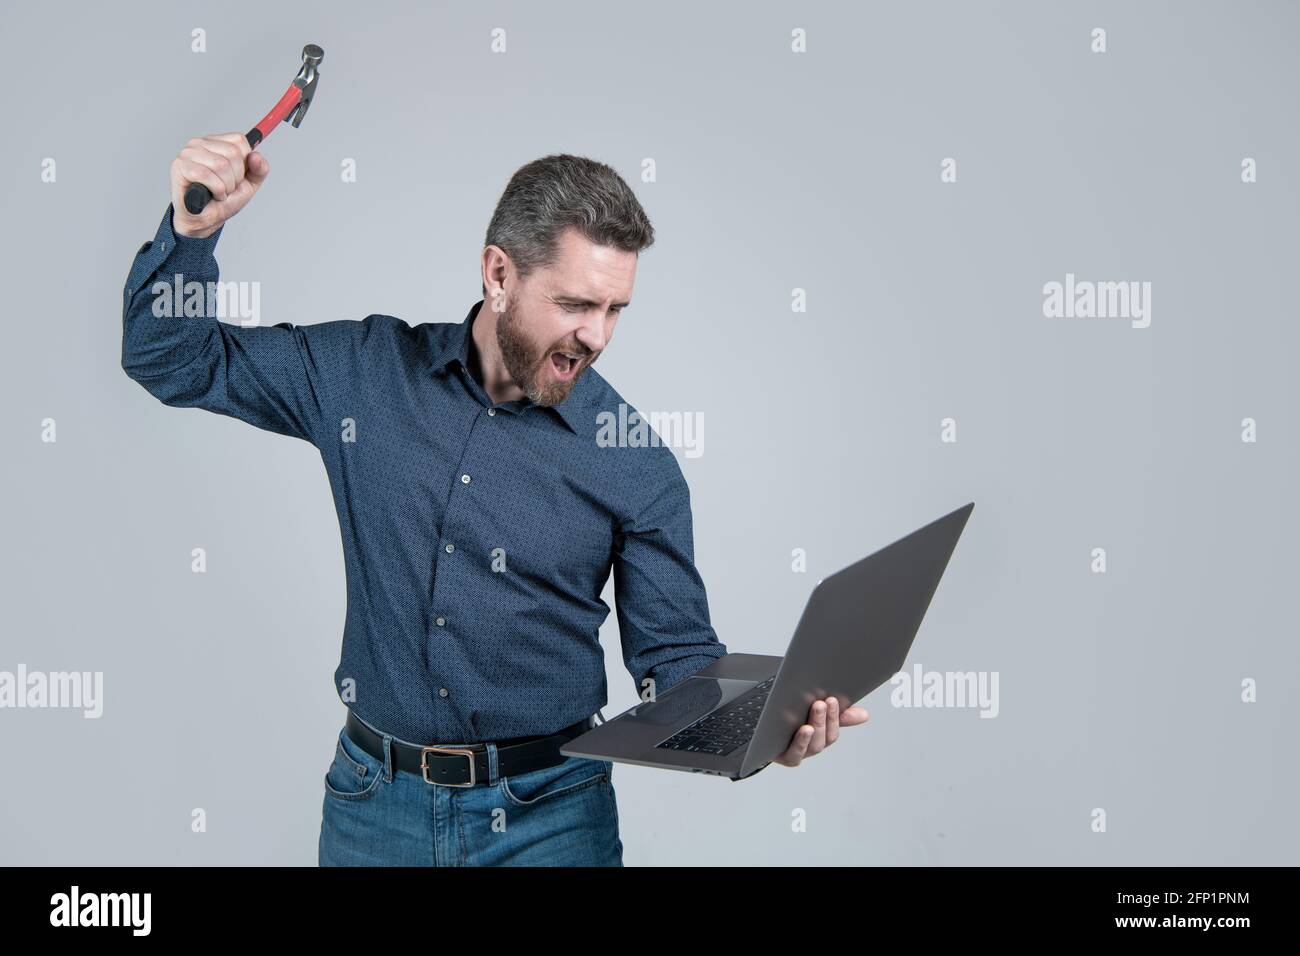 Releasing anger on computer. Stressed man yelling and breaking laptop with hammer. Got stressed Stock Photo